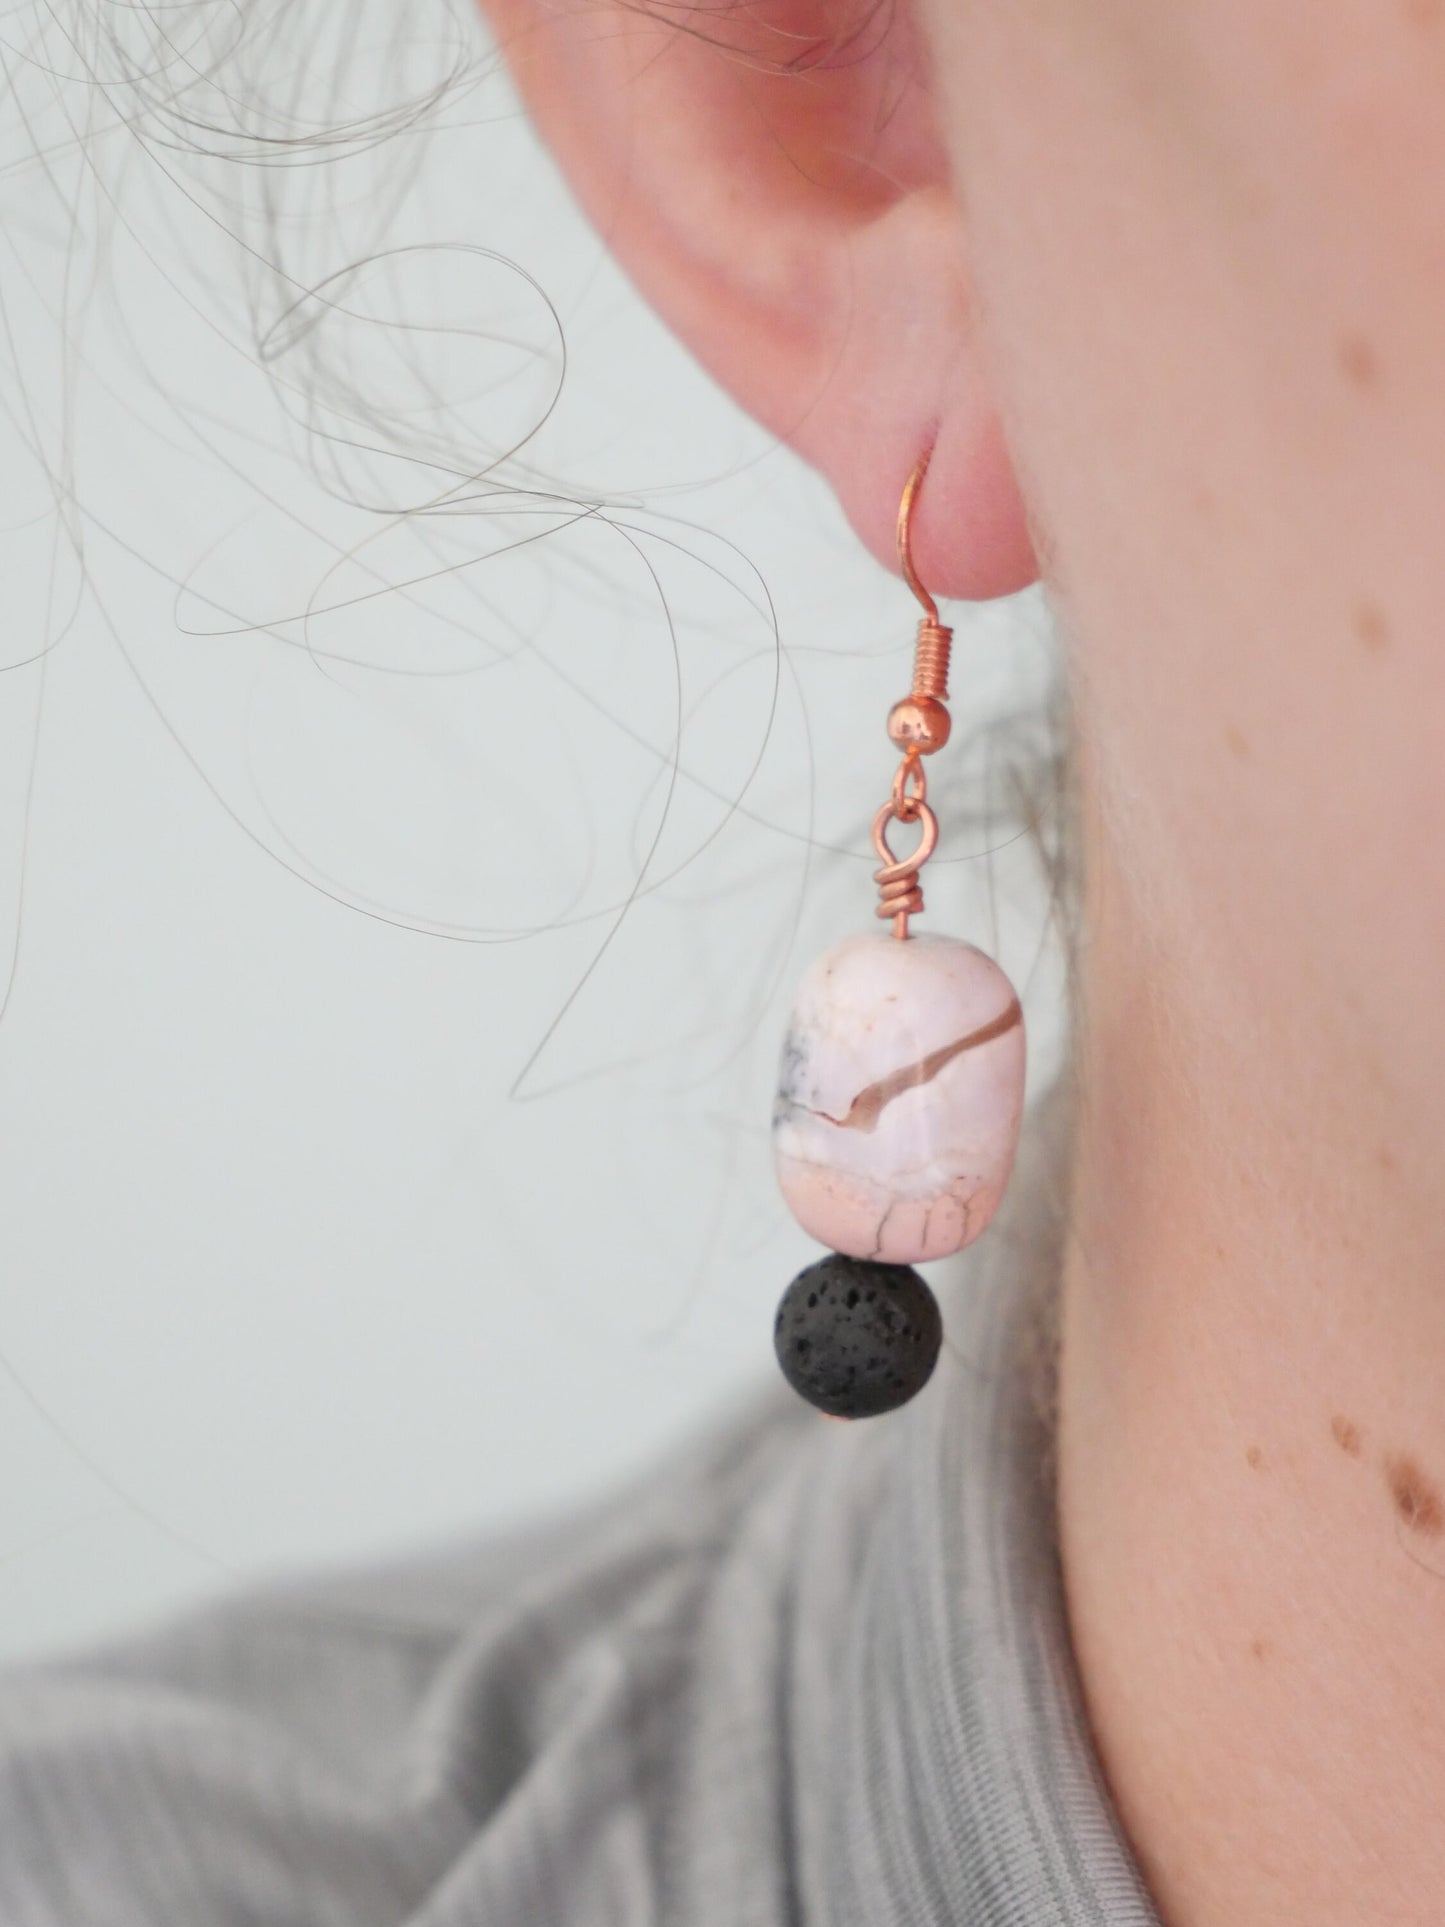 Copper, Lava Rock, Pink Magnesite Dangle Earrings, Hypoallergenic, Made in Maine, Inspired by Maine